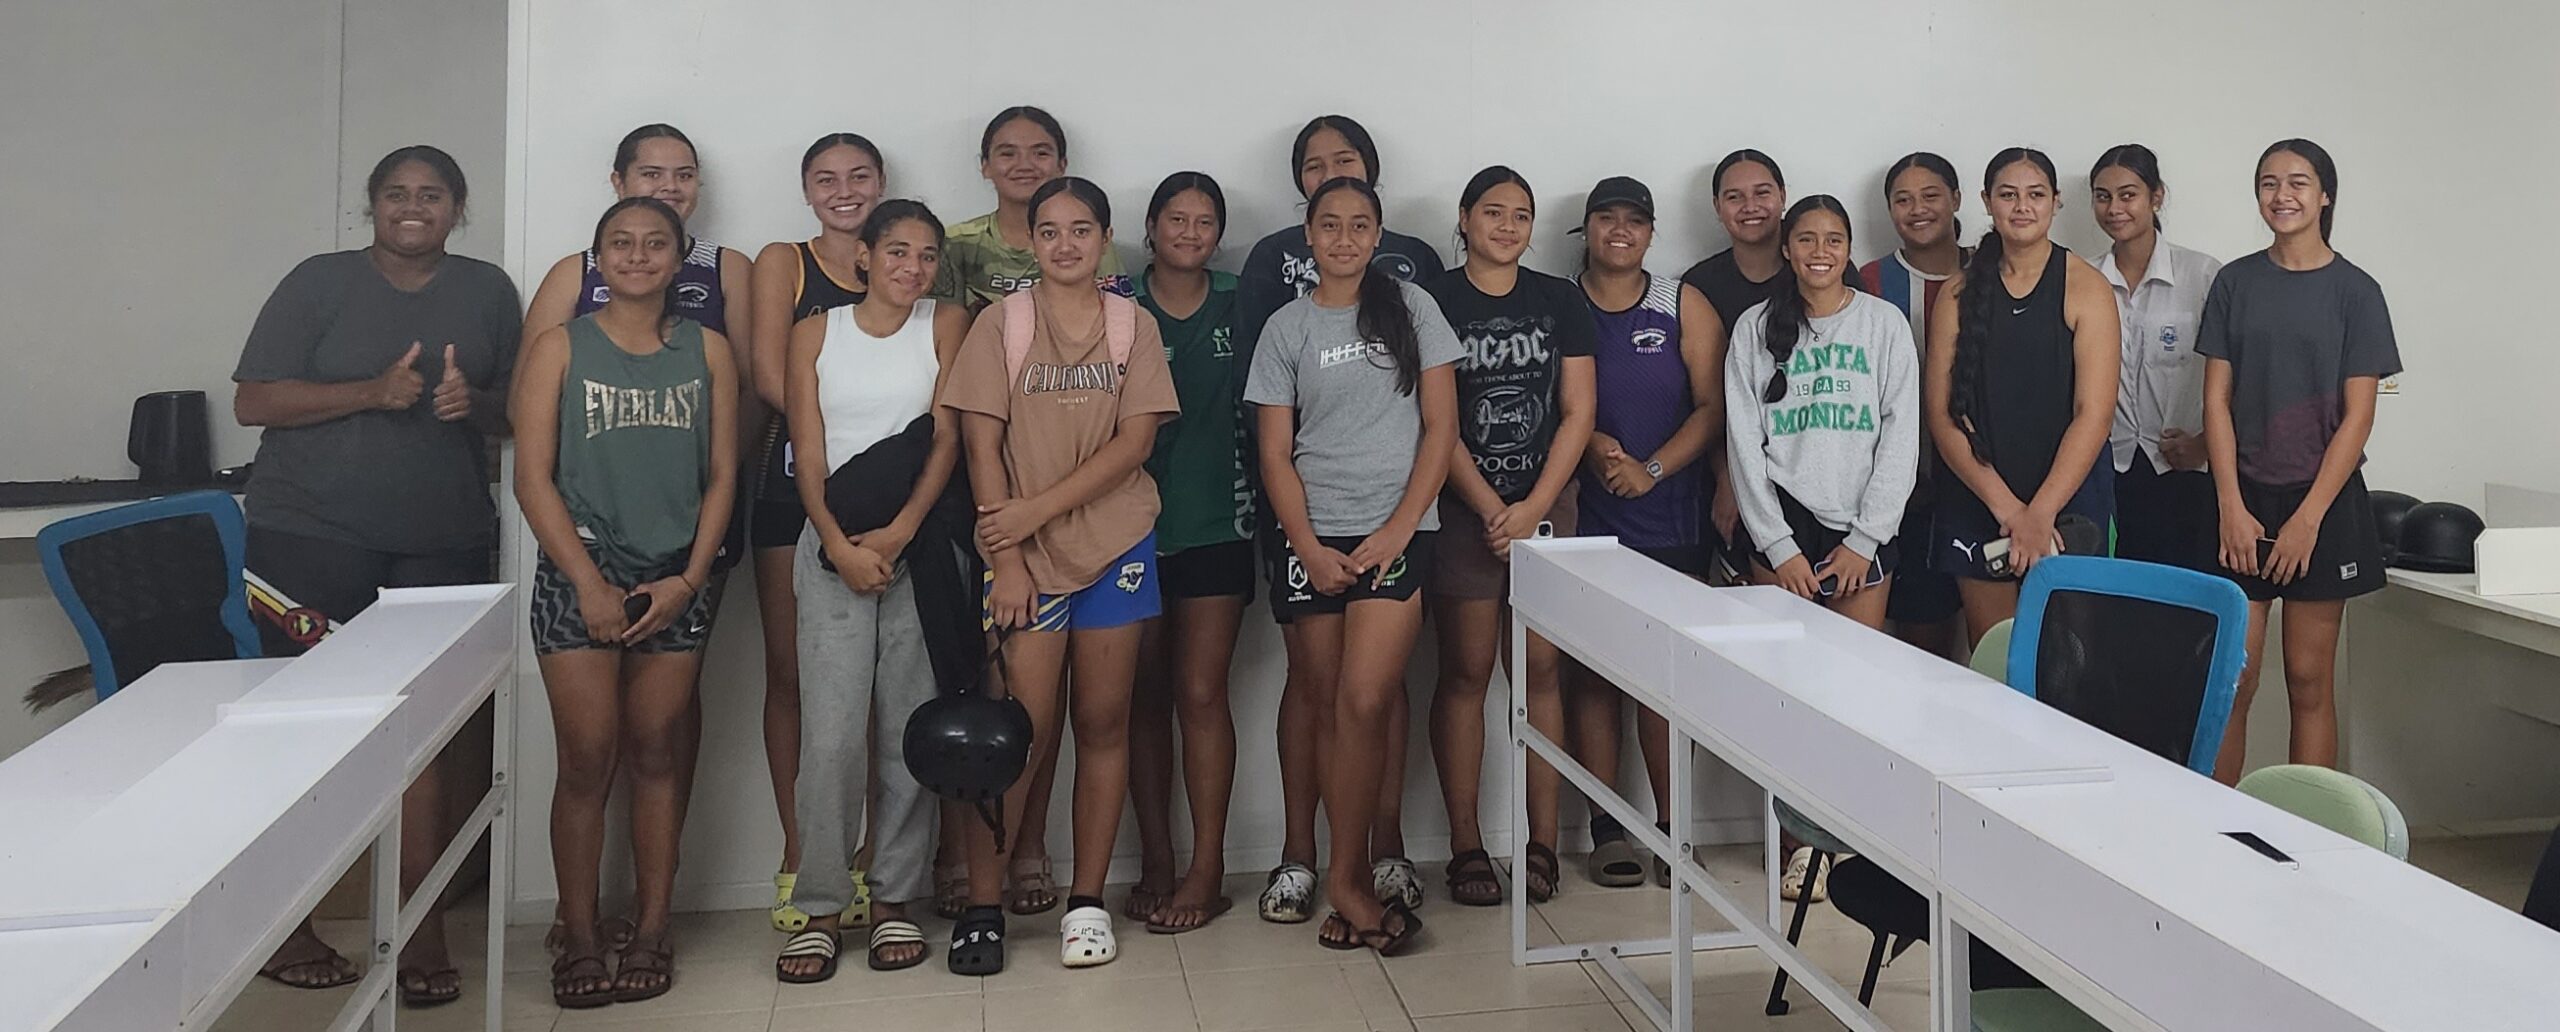 Netball Cook Islands creates opportunities for young women